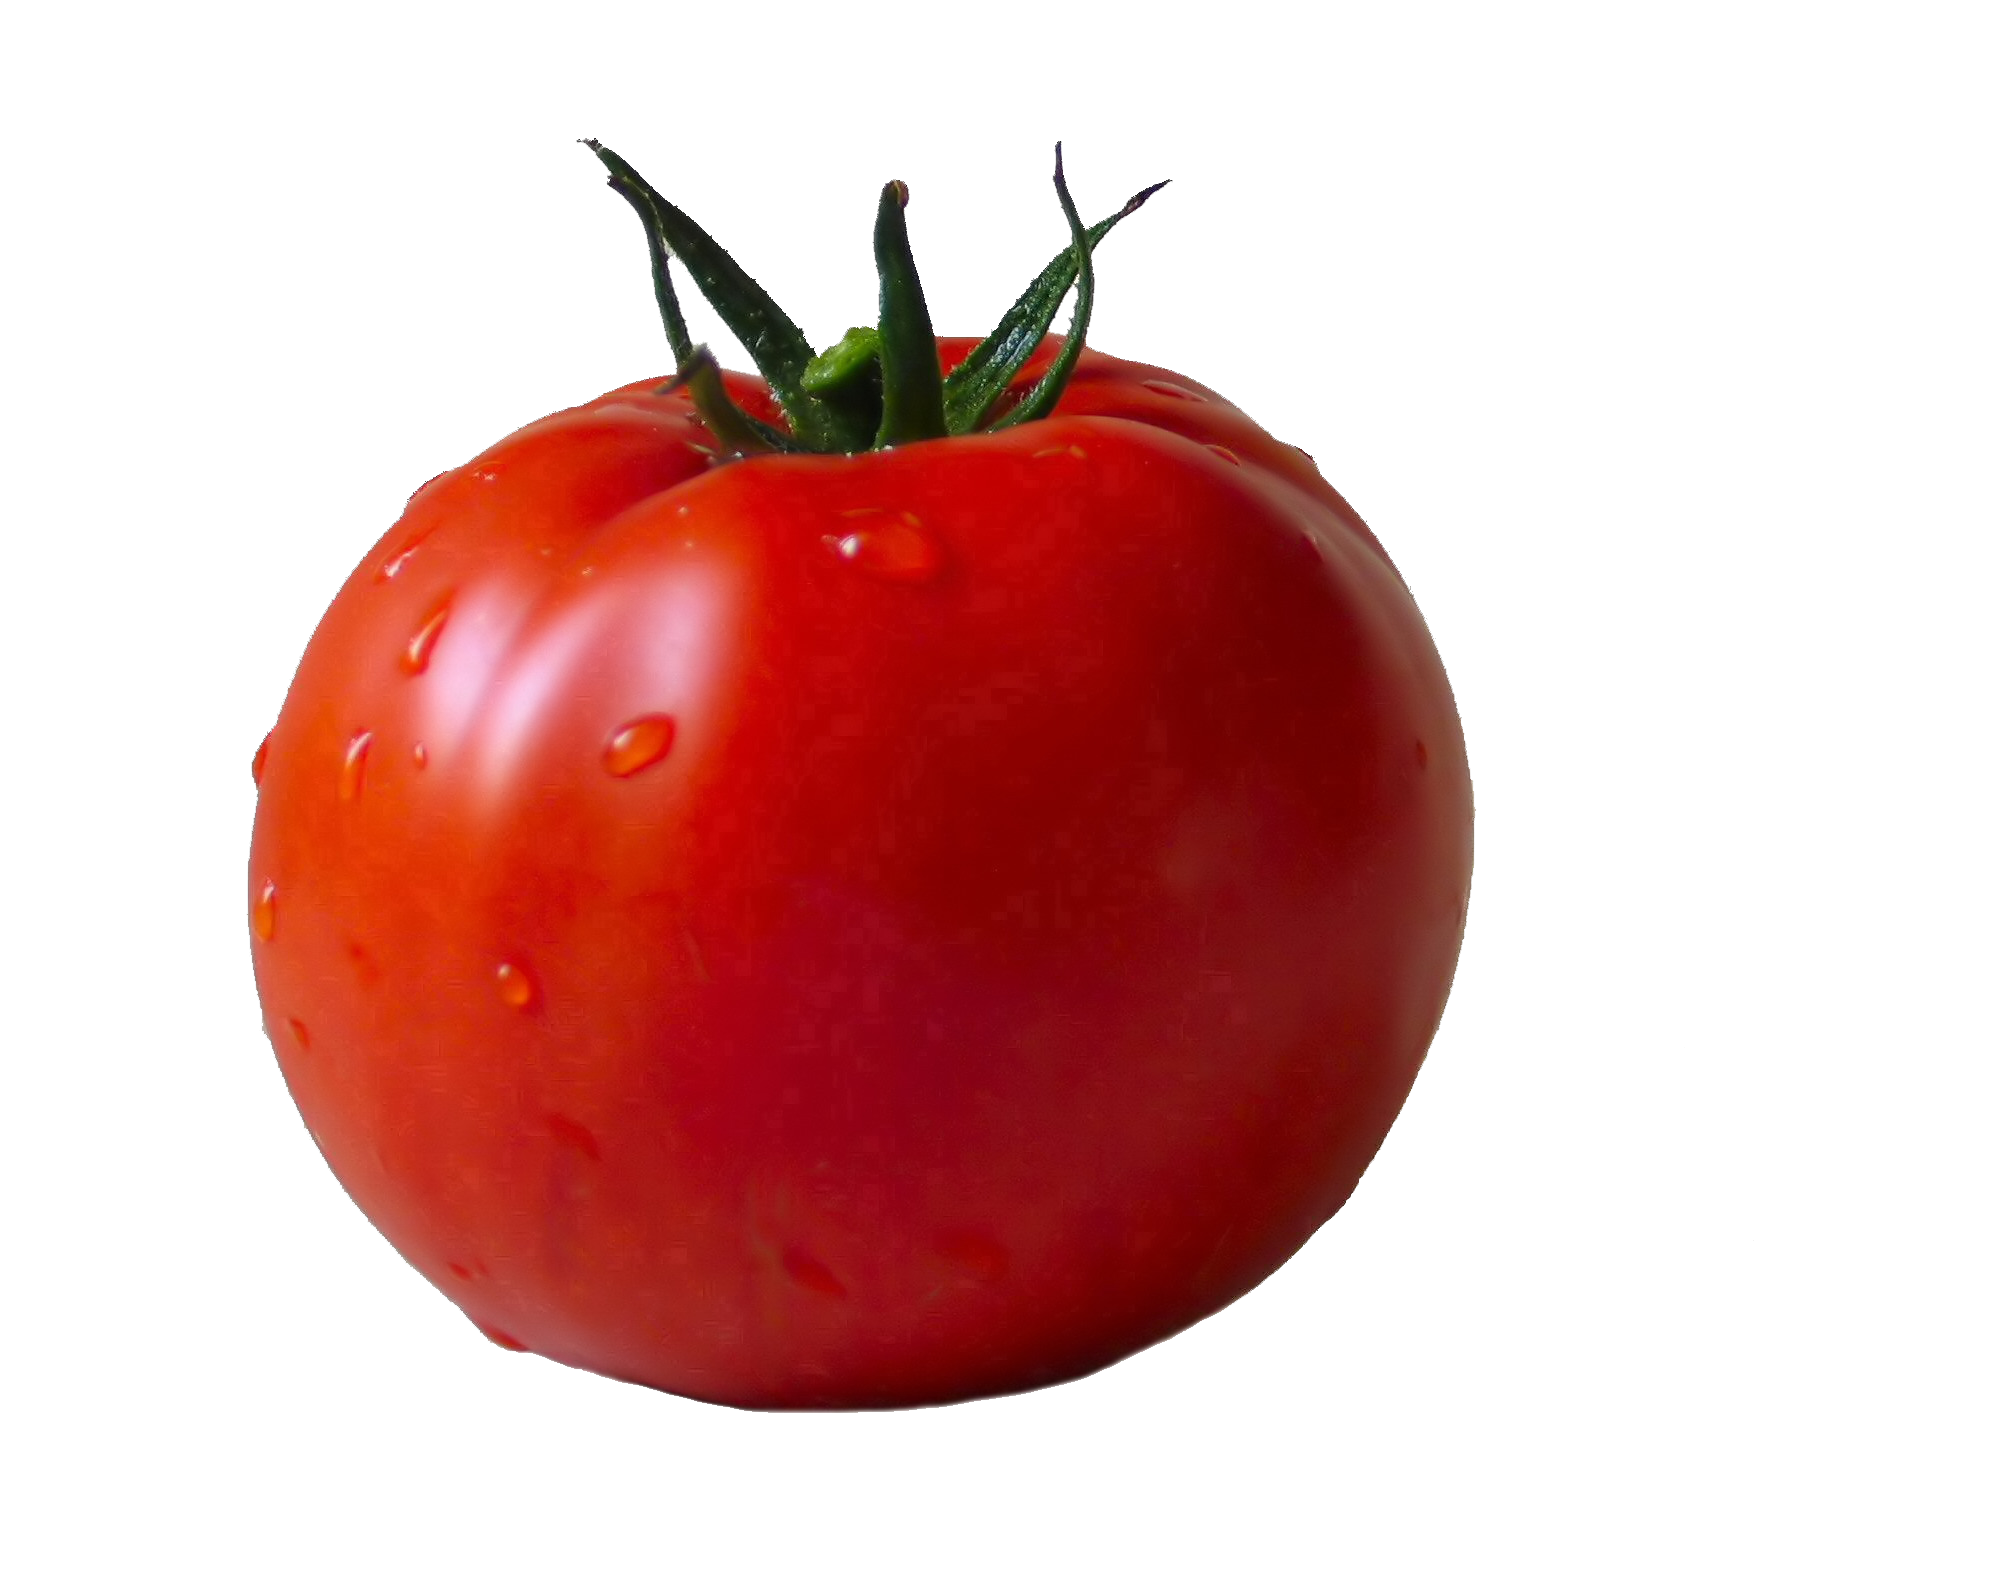 Tomato Backgrounds, Compatible - PC, Mobile, Gadgets| 1996x1596 px